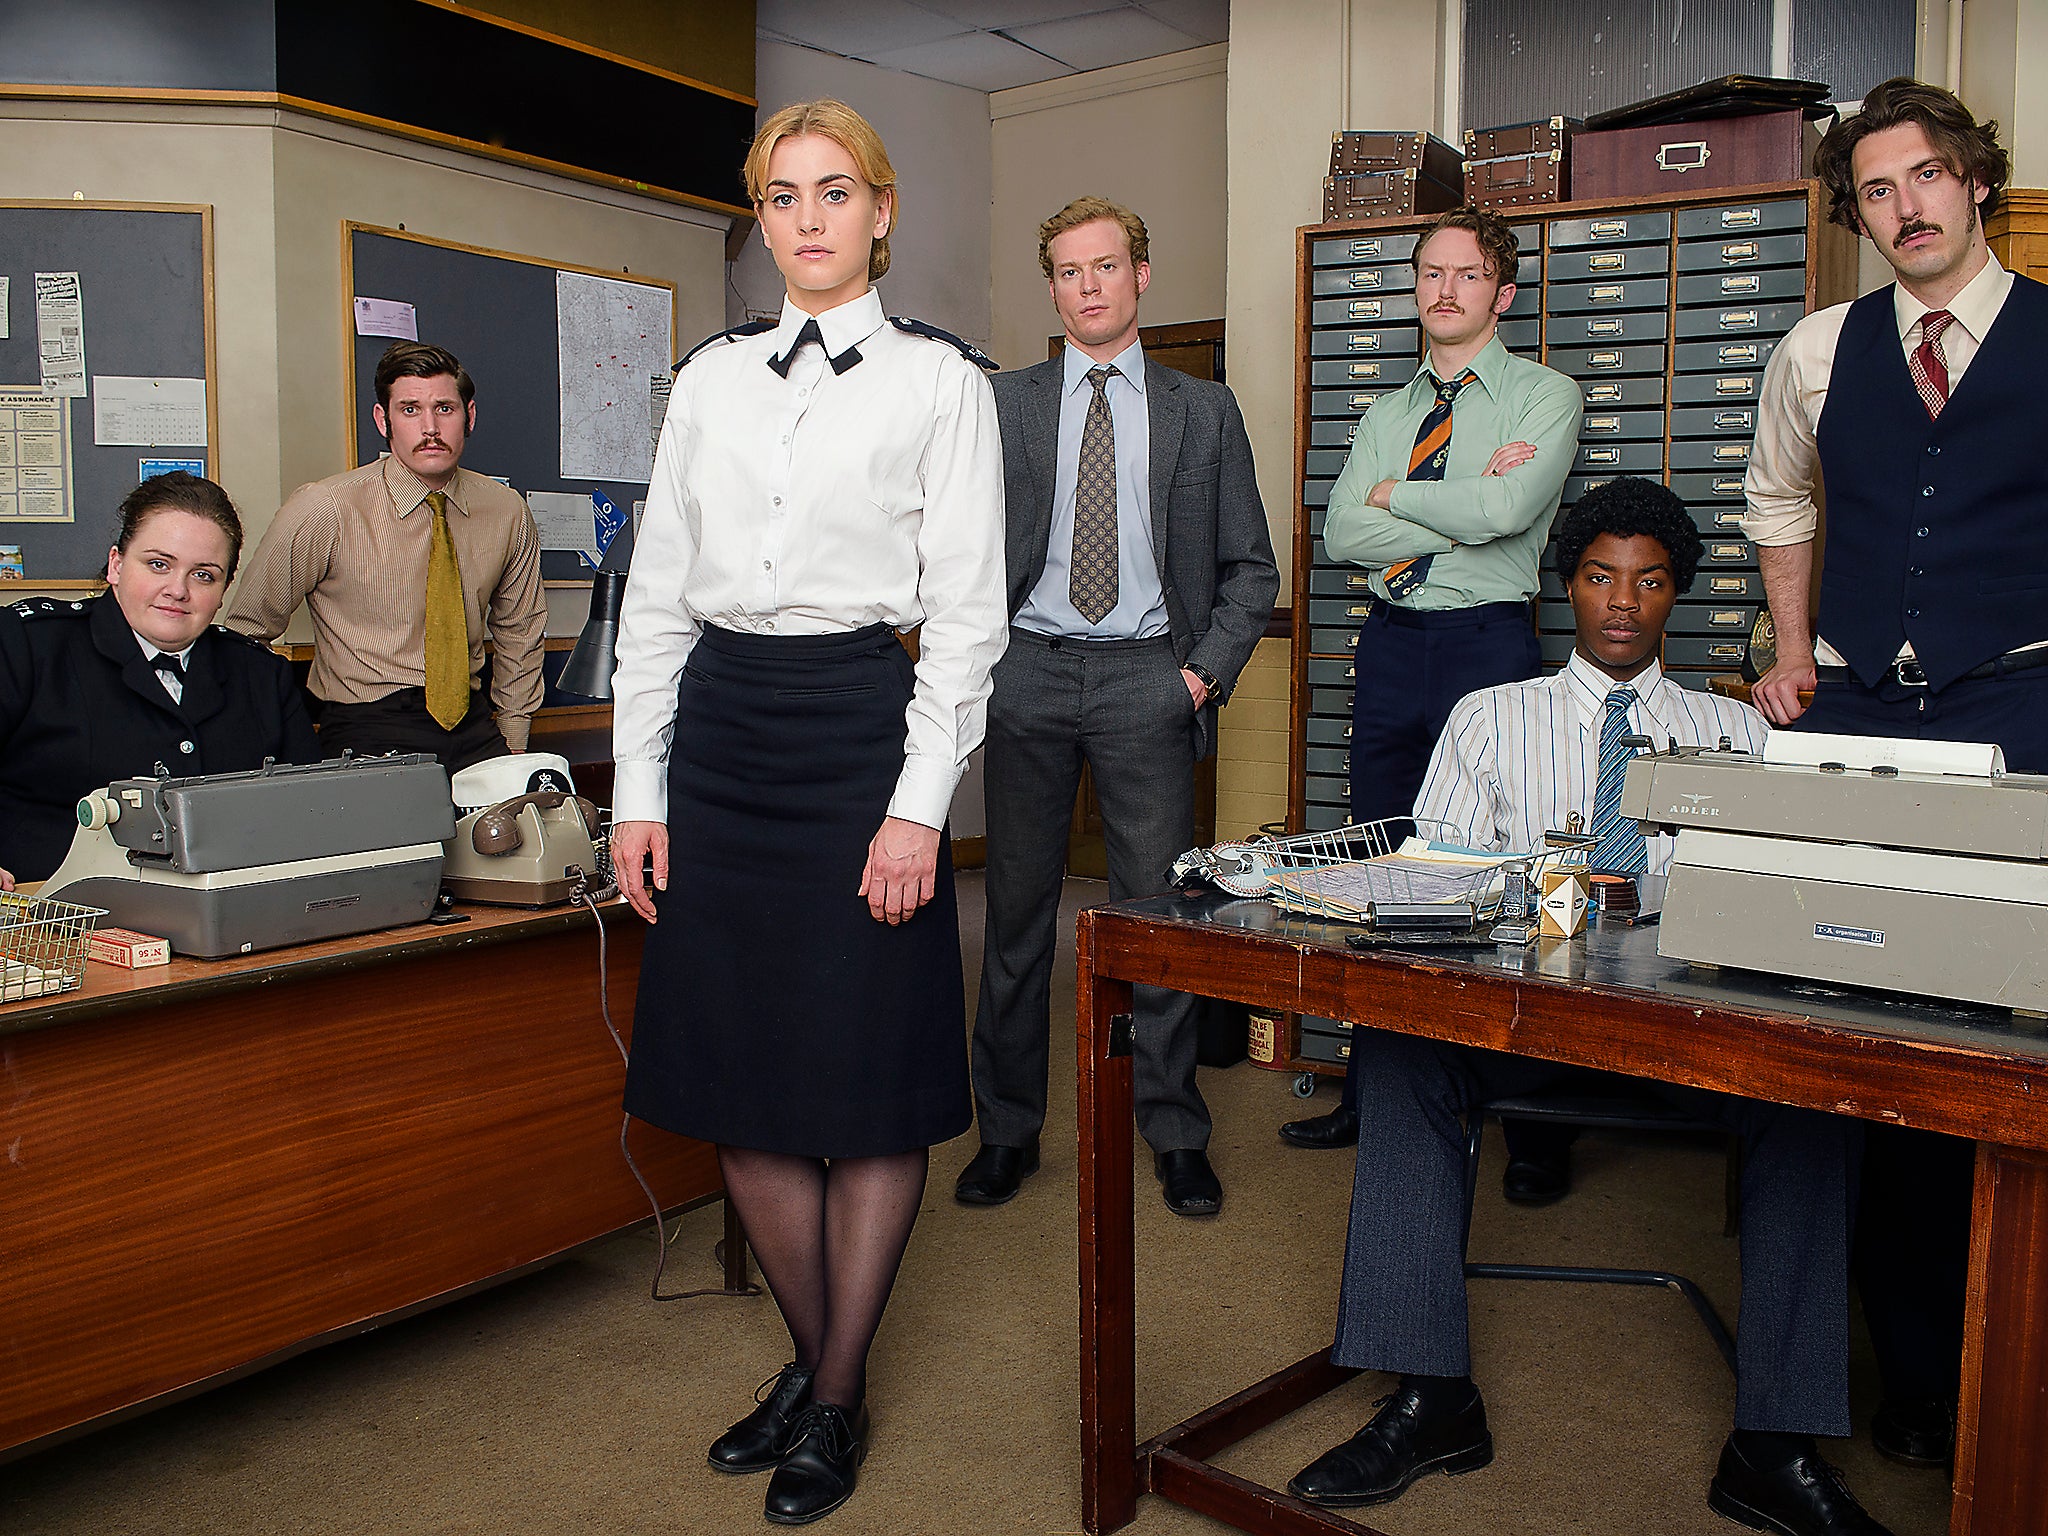 &#13;
Stefanie Martini plays in the young Jane Tennision in the new 1970s-set Prime Suspect &#13;